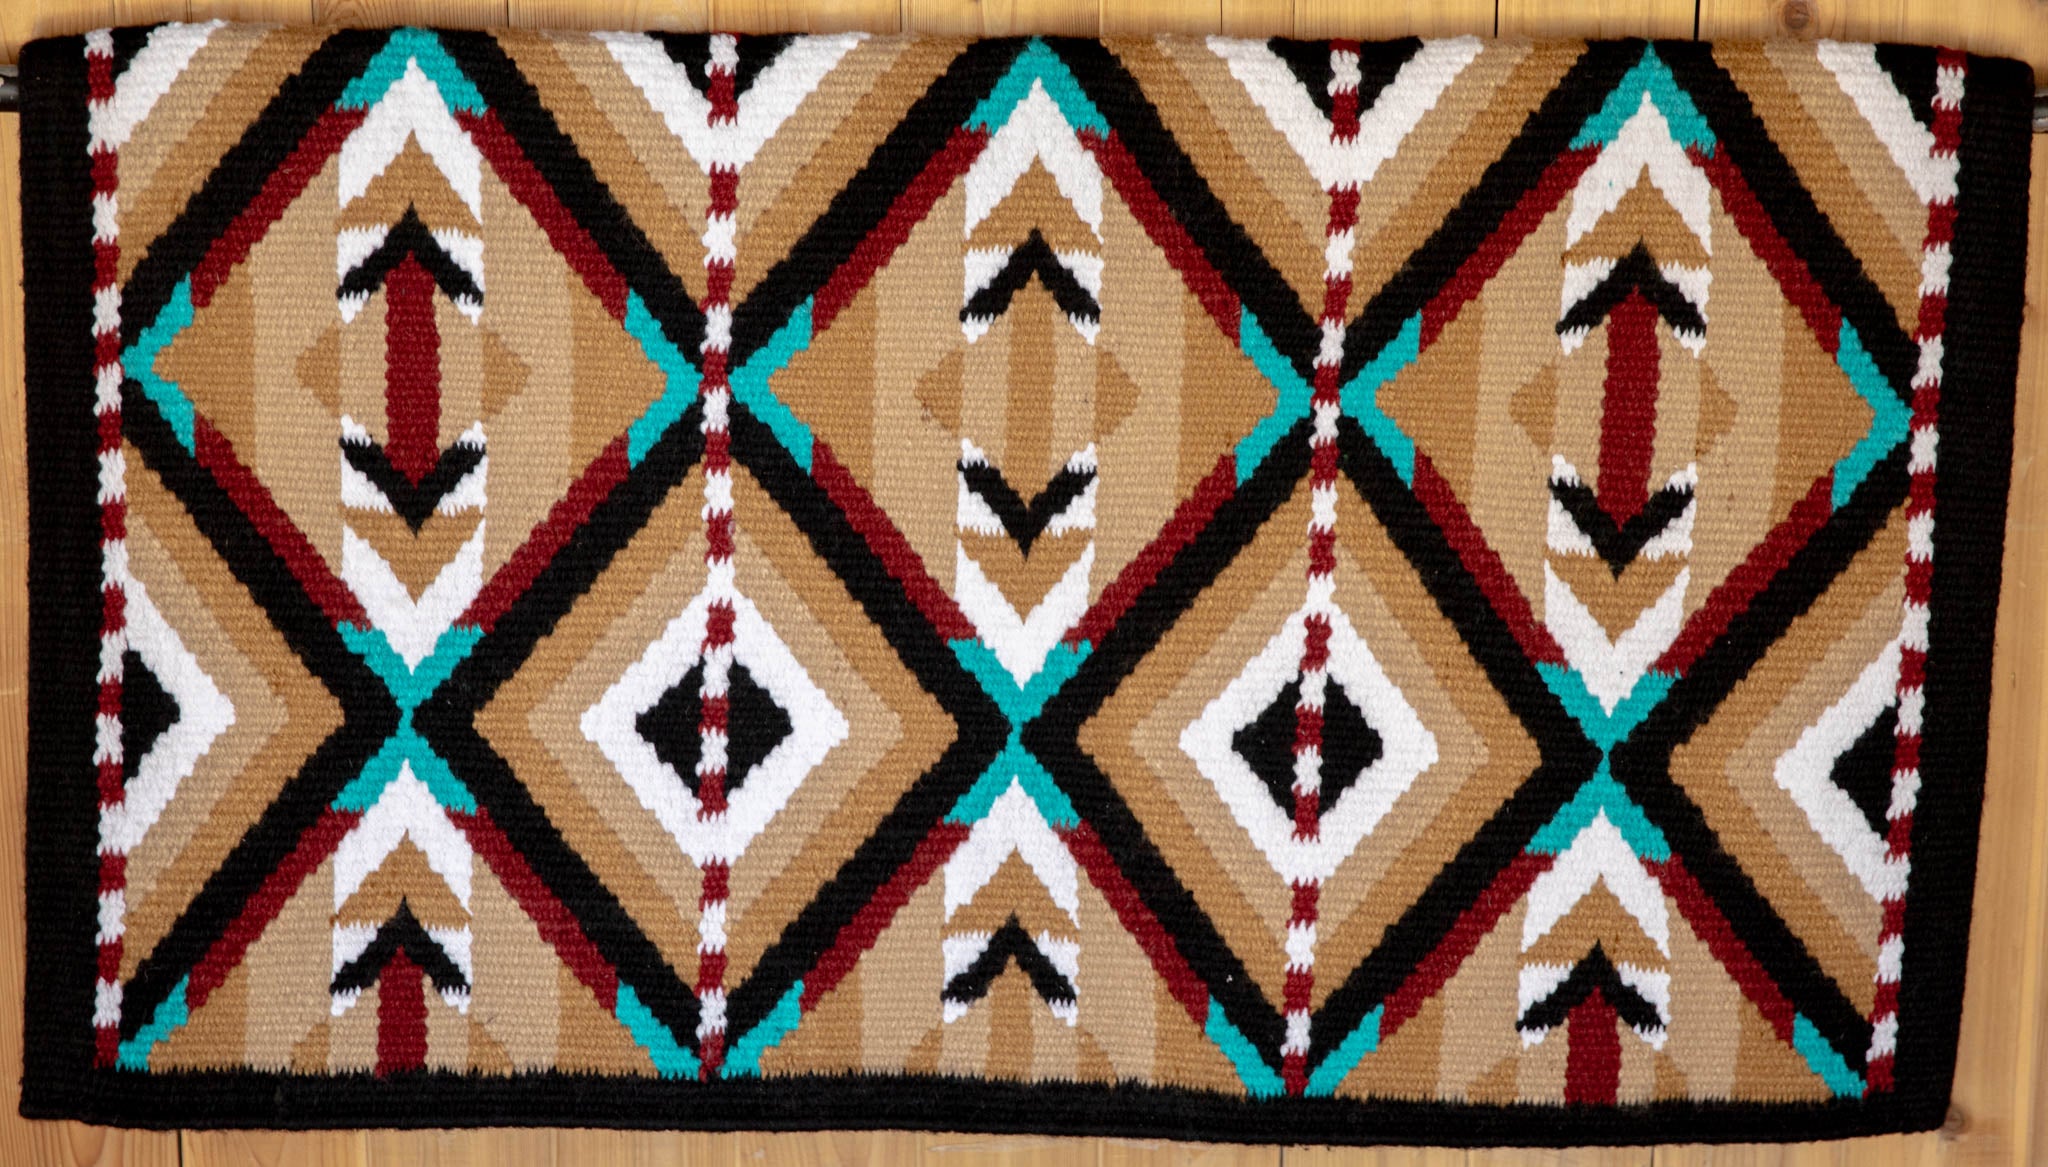 Black, Tans, Light Teal, Dark Red w/ White Accents Flat Show Blanket